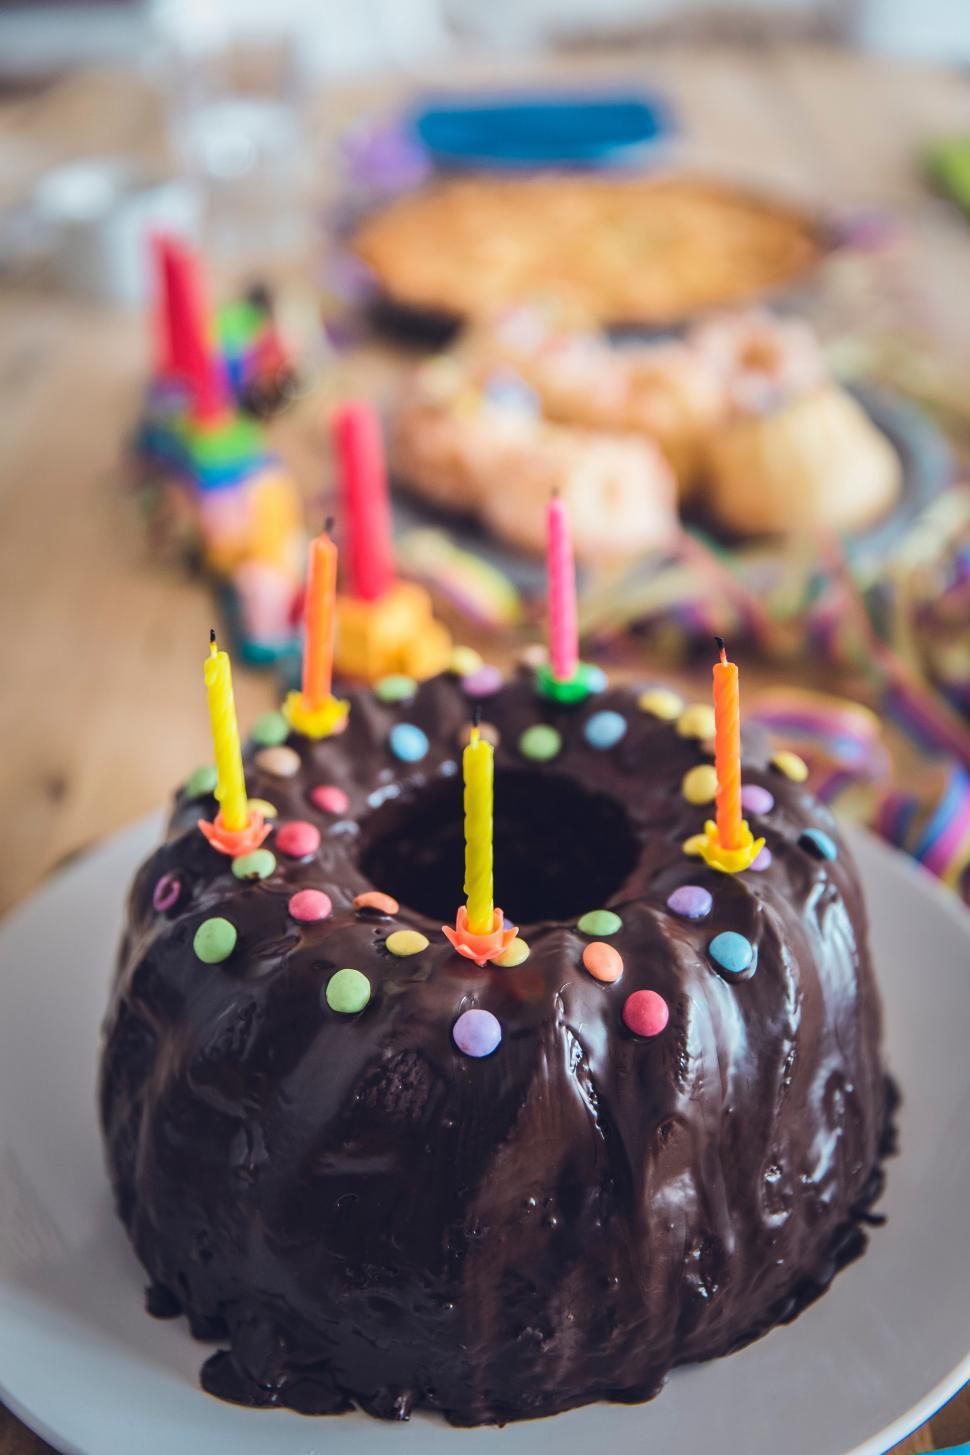 Free Image of Chocolate Bundt Cake With Lit Candles on a Plate 